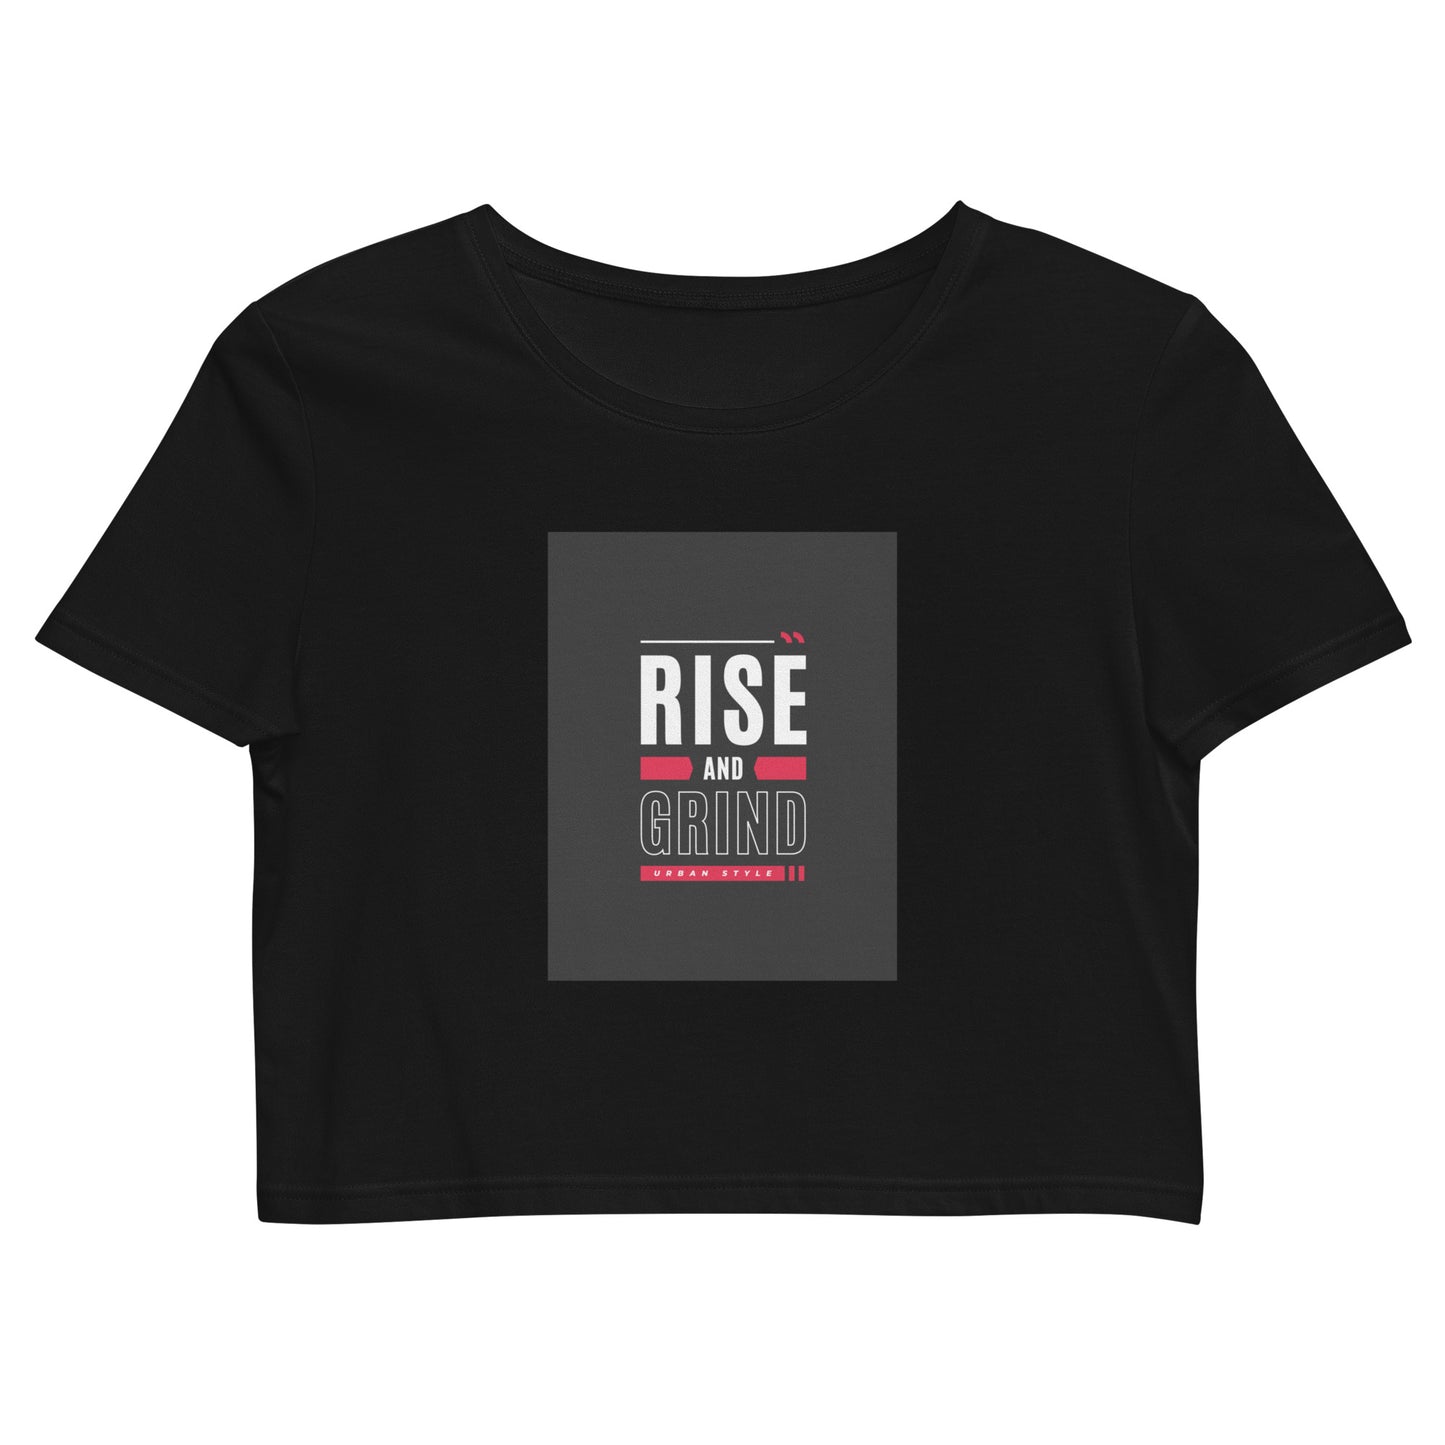 RISE AND GRIND WOMEN'S Organic Crop Top